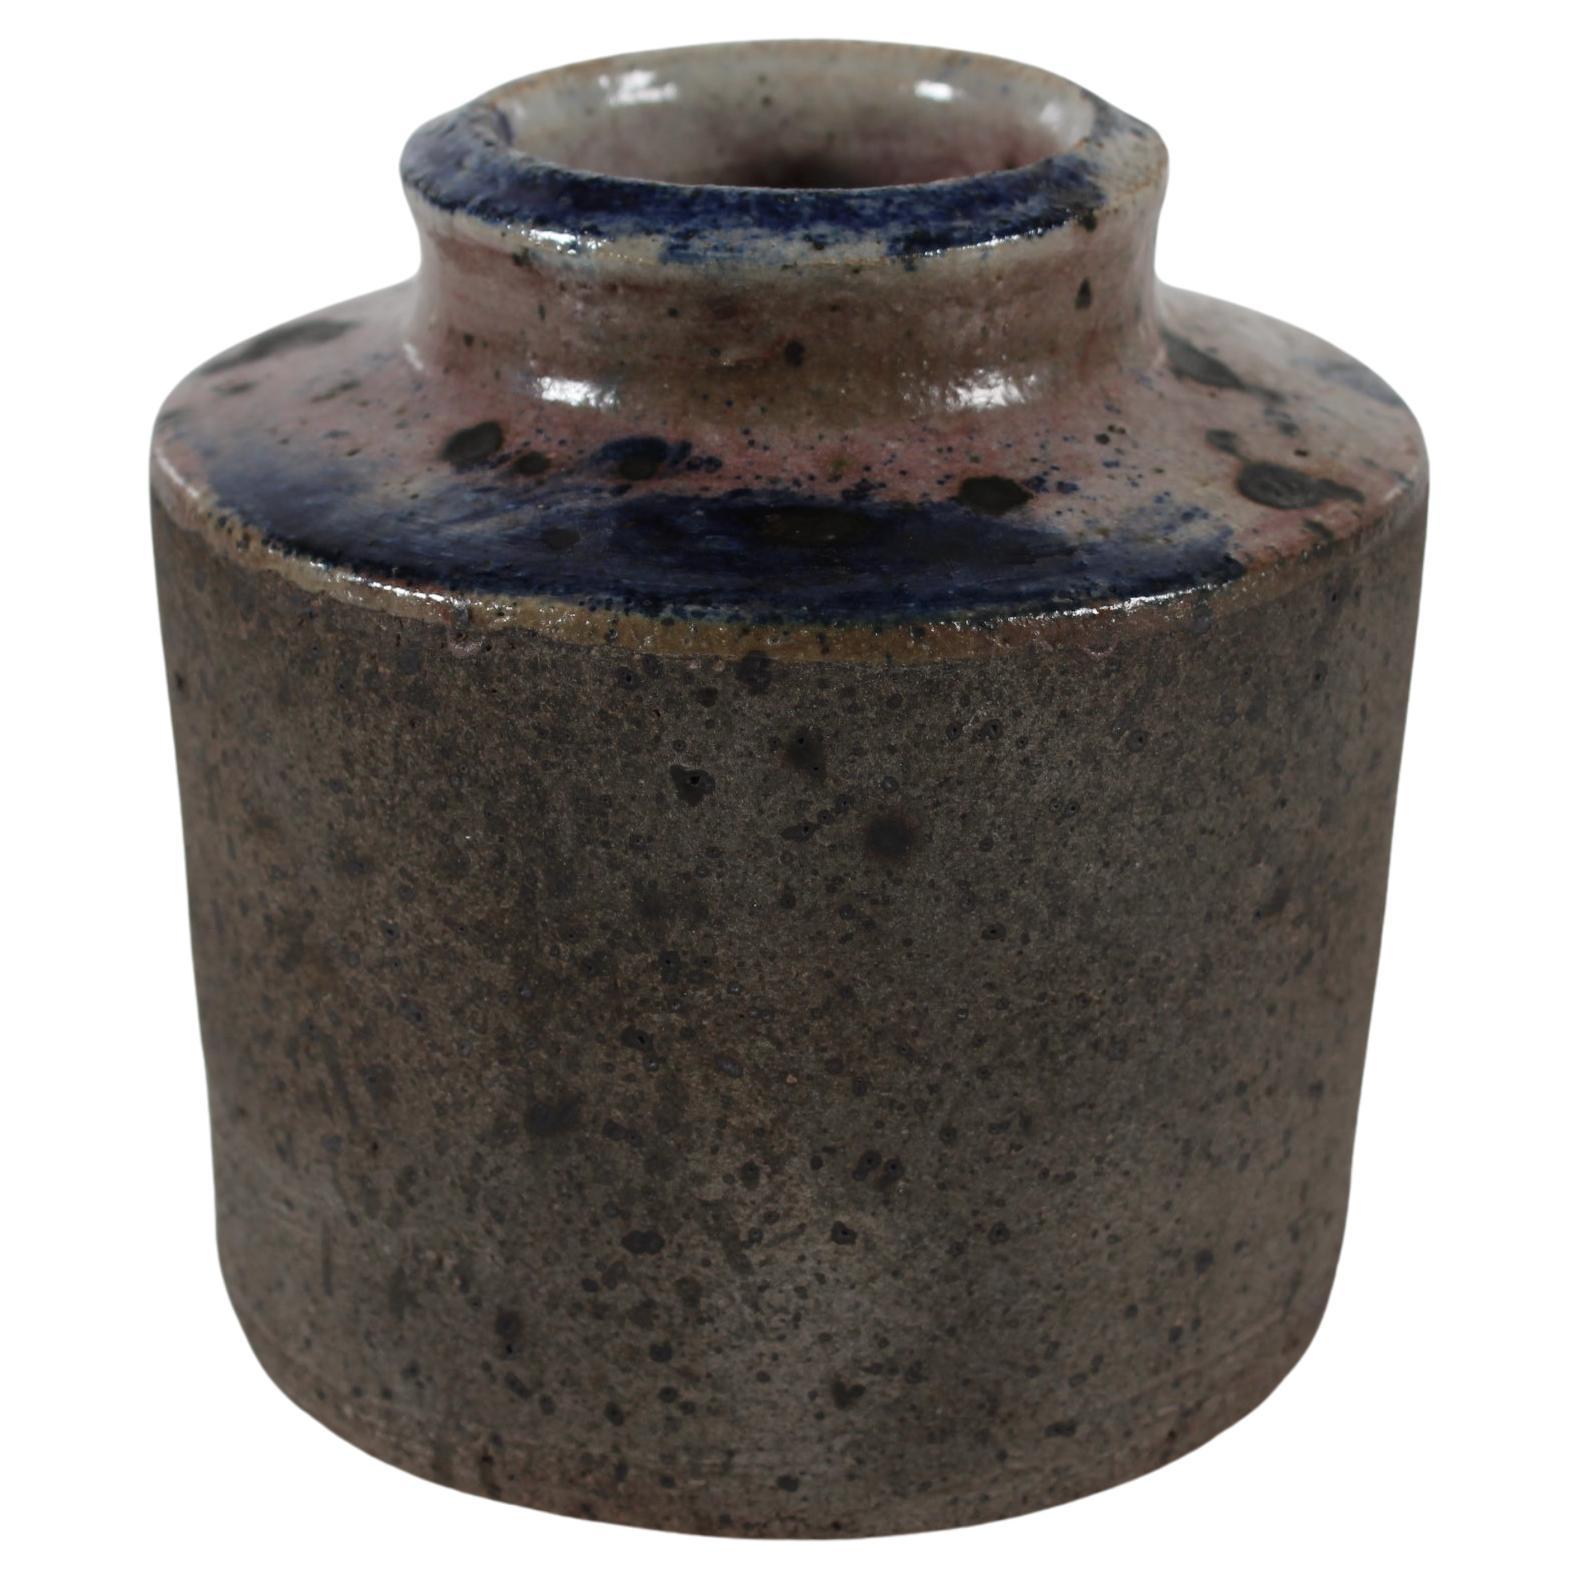 Danish Studio Ceramic Vase by Chris Moes Earth Tones with Speckles, 1970s For Sale